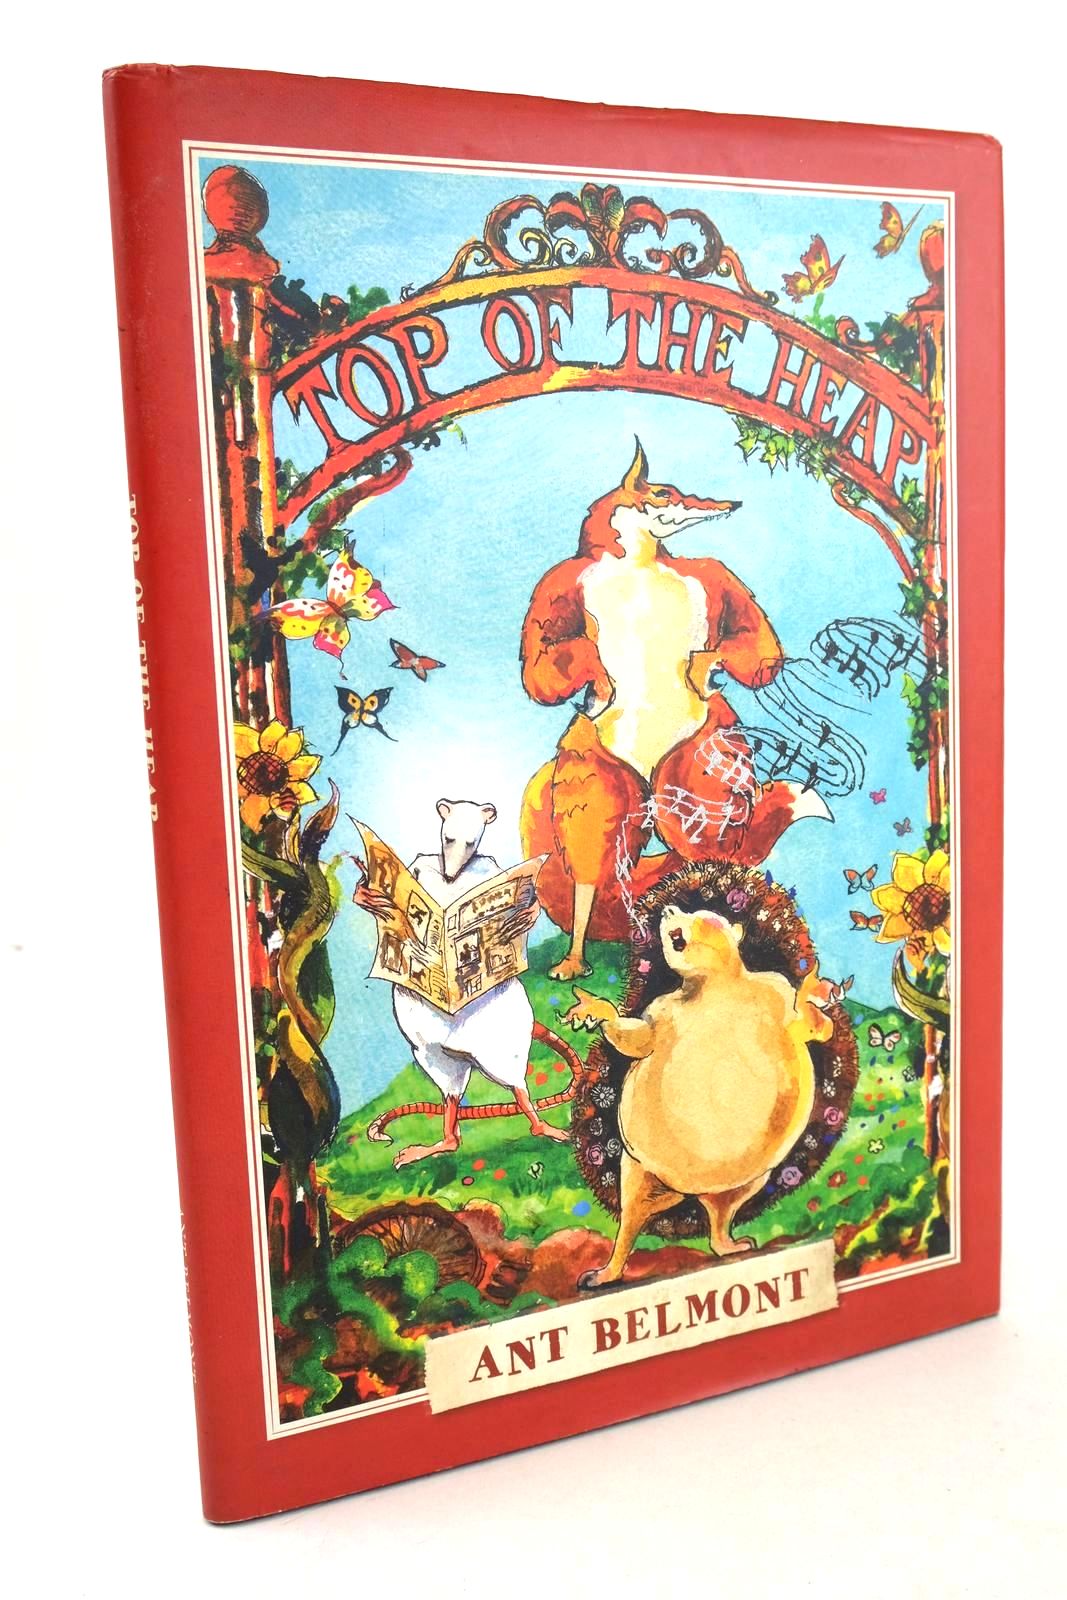 Photo of TOP OF THE HEAP written by Belmont, Ant illustrated by Belmont, Ant published by Ant Belmont (STOCK CODE: 1326471)  for sale by Stella & Rose's Books